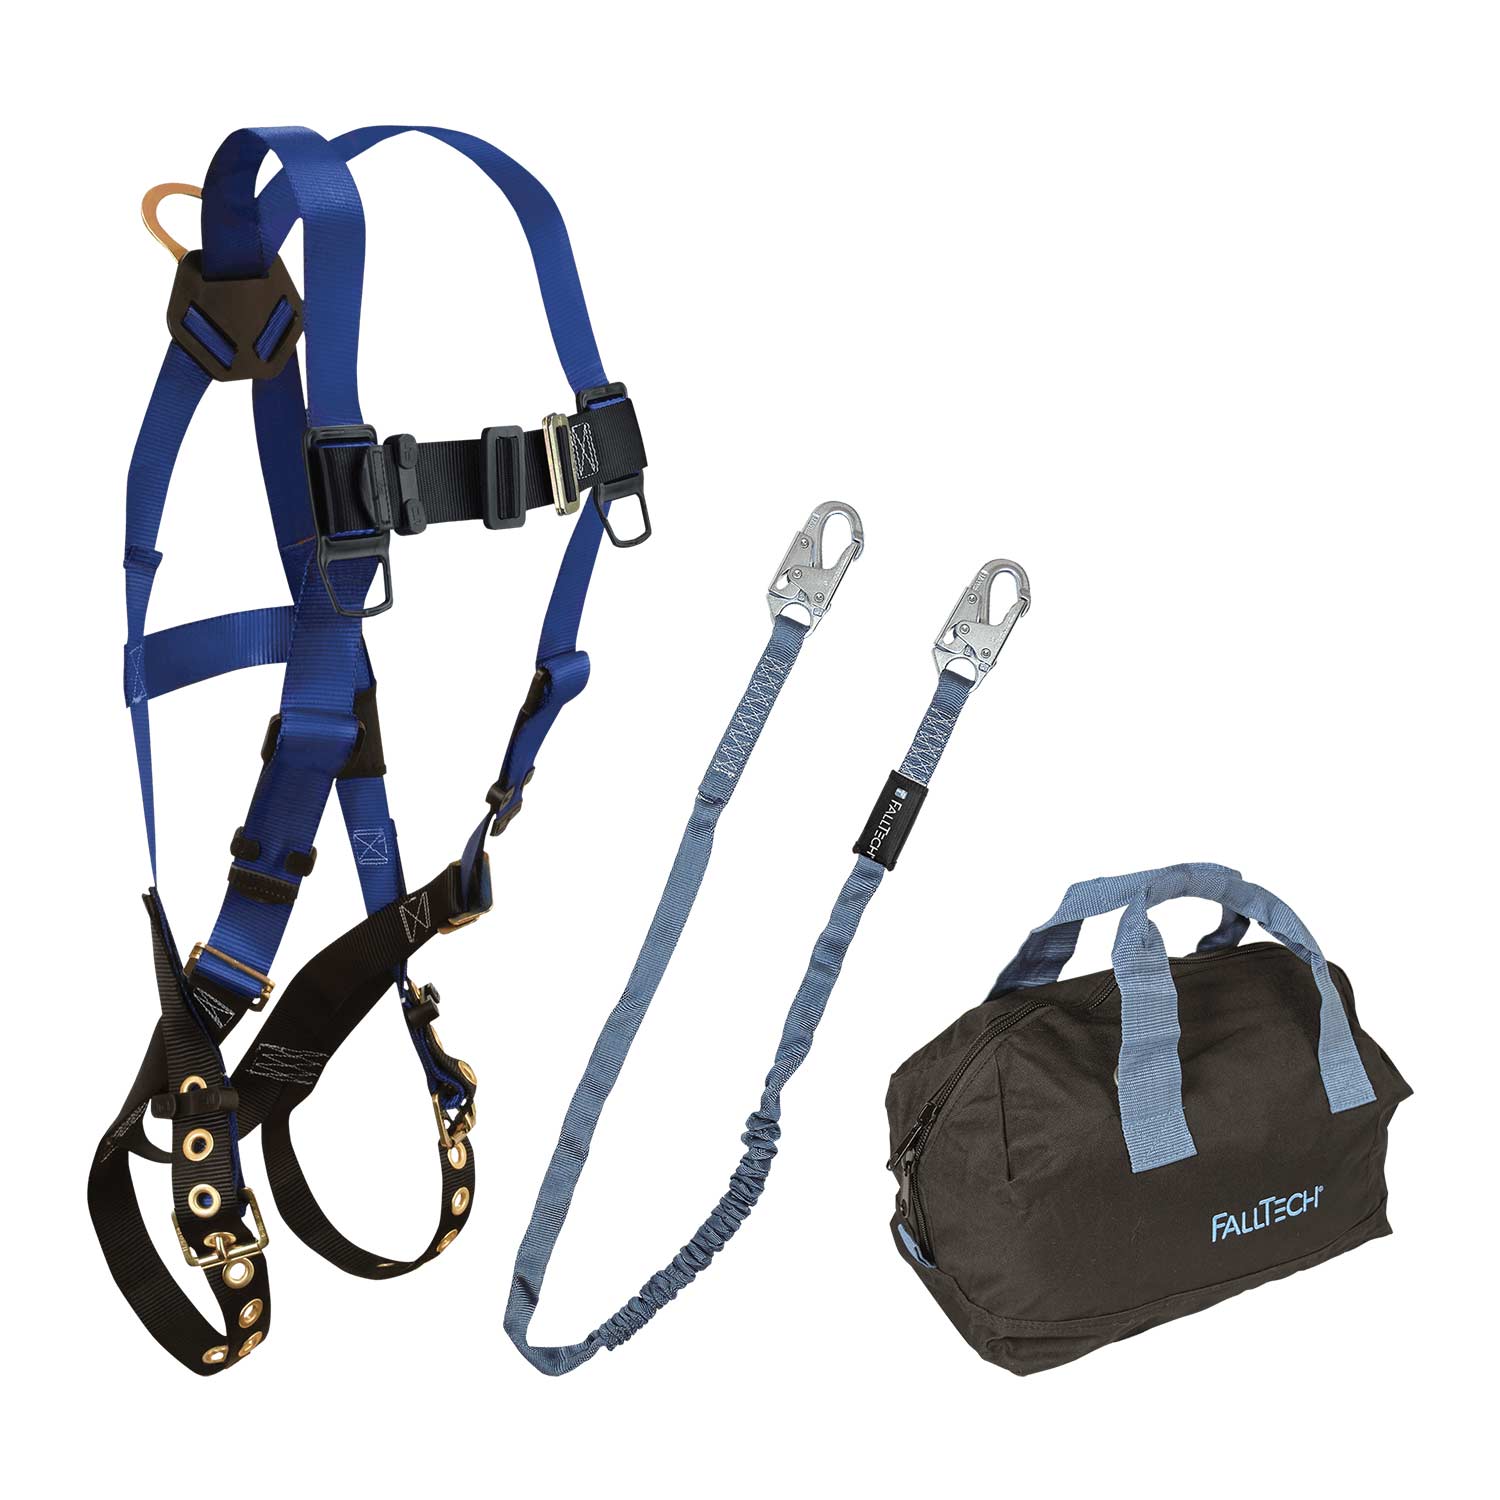 FallTech Harness and Lanyard Kit with Storage Bag 7016 8259 5006MP